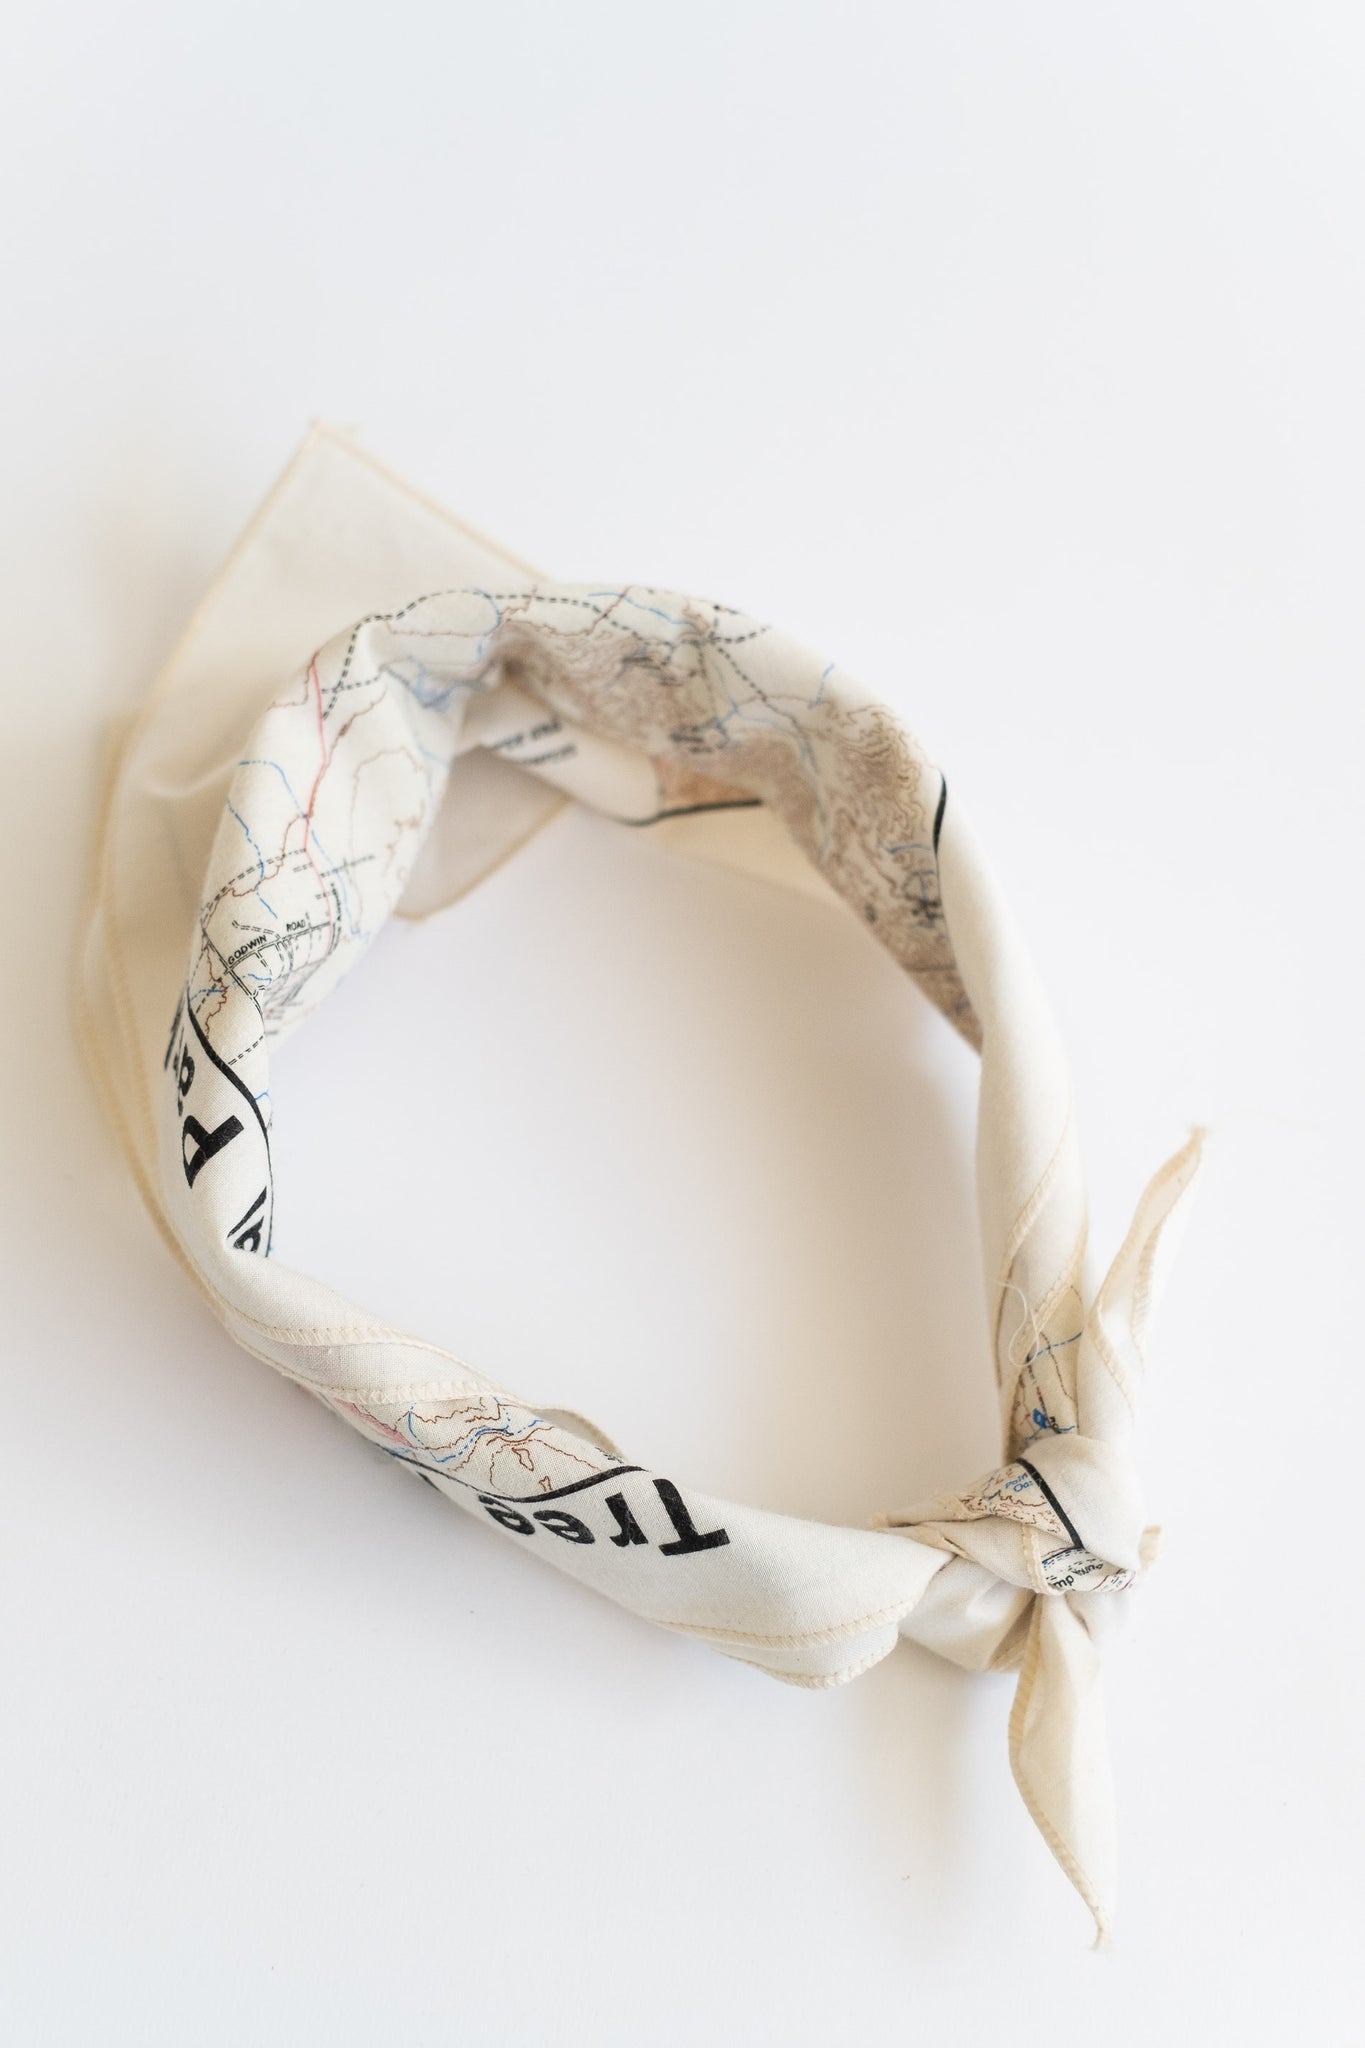 understory-shop - THE PRINTED IMAGE - PRINTED BANDANA PARKS